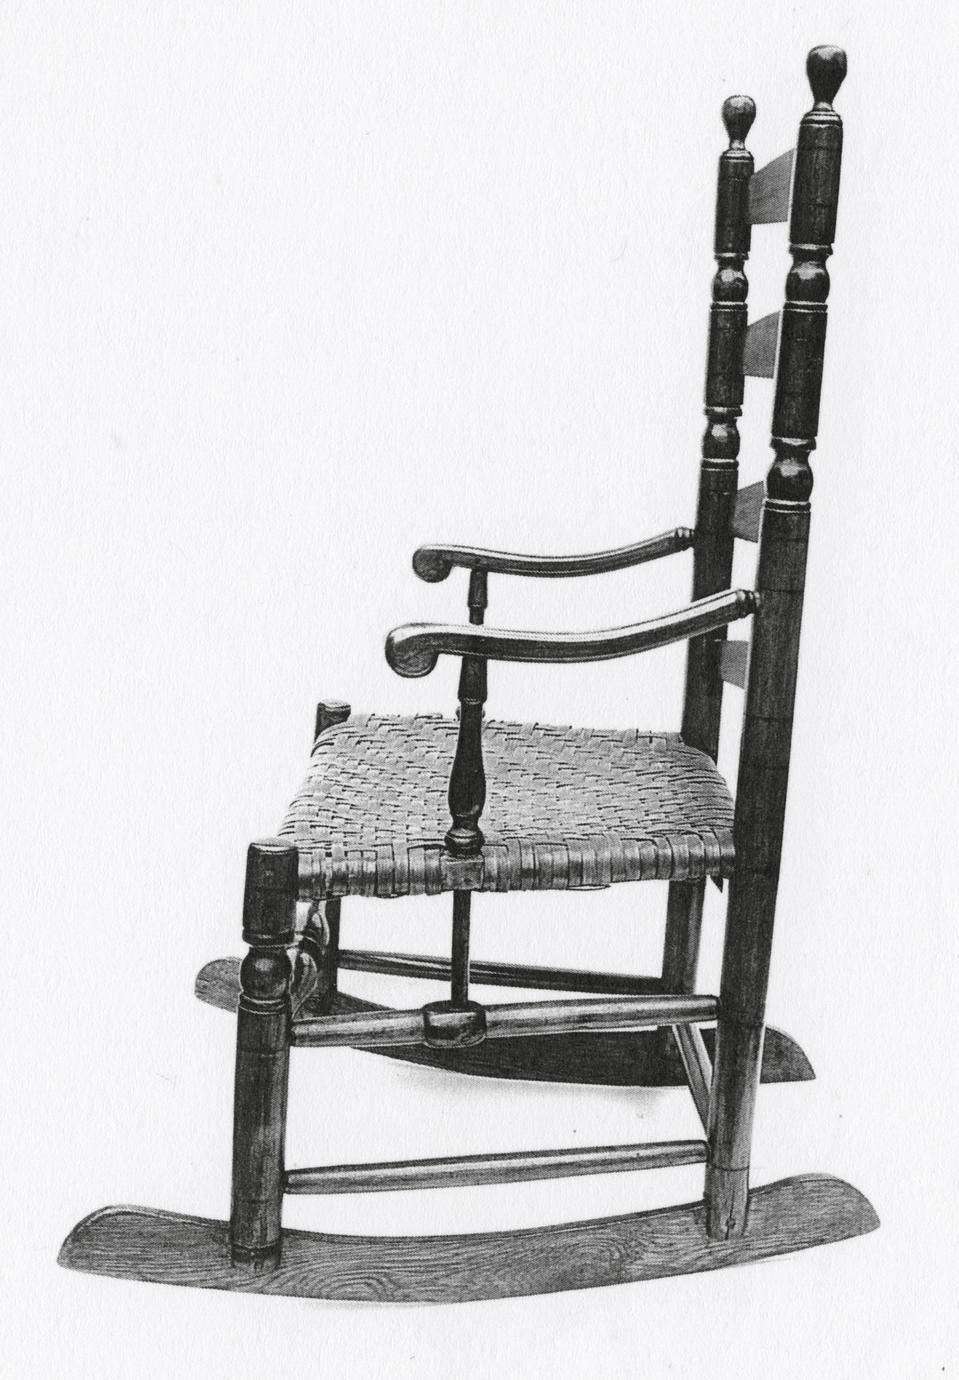 Black and white photograph of a slat-back armchair with rockers.